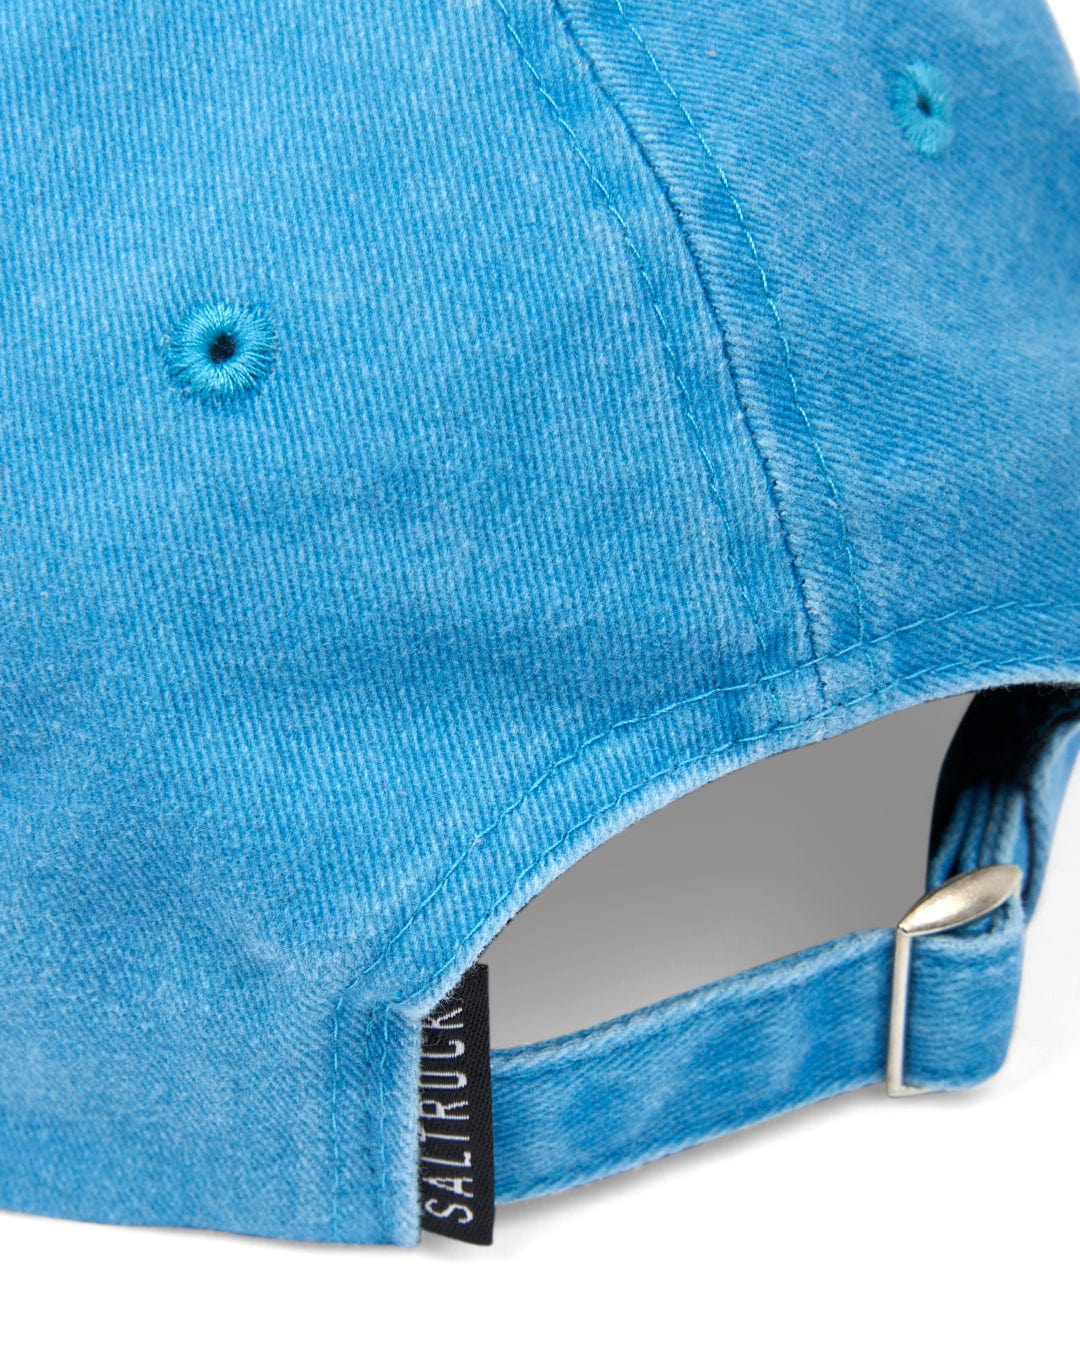 Close-up of a Saltrock Sunburst Cap - Blue with sunburst graphic embroidery and an adjustable strap.